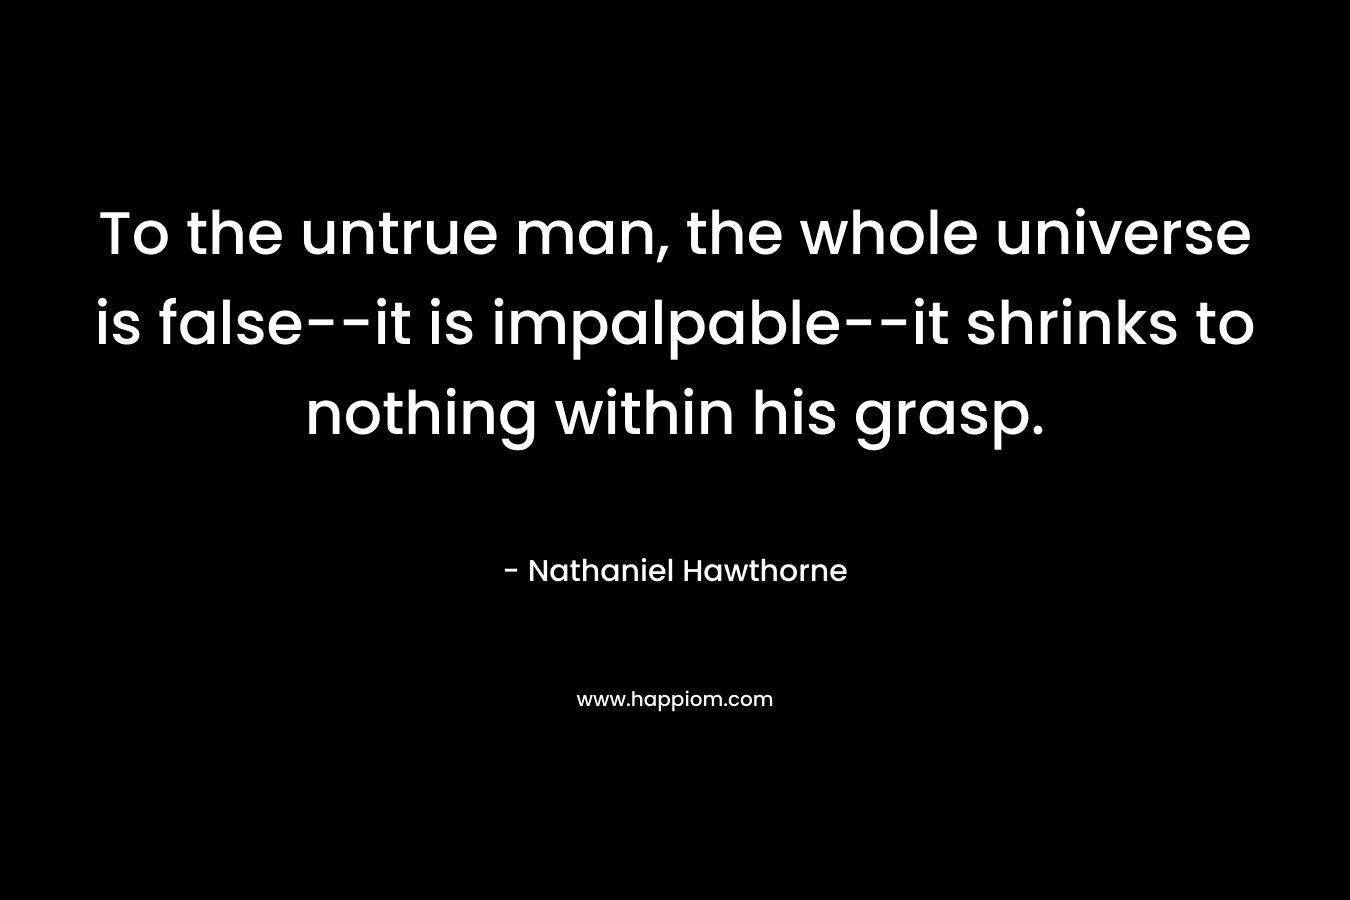 To the untrue man, the whole universe is false--it is impalpable--it shrinks to nothing within his grasp.